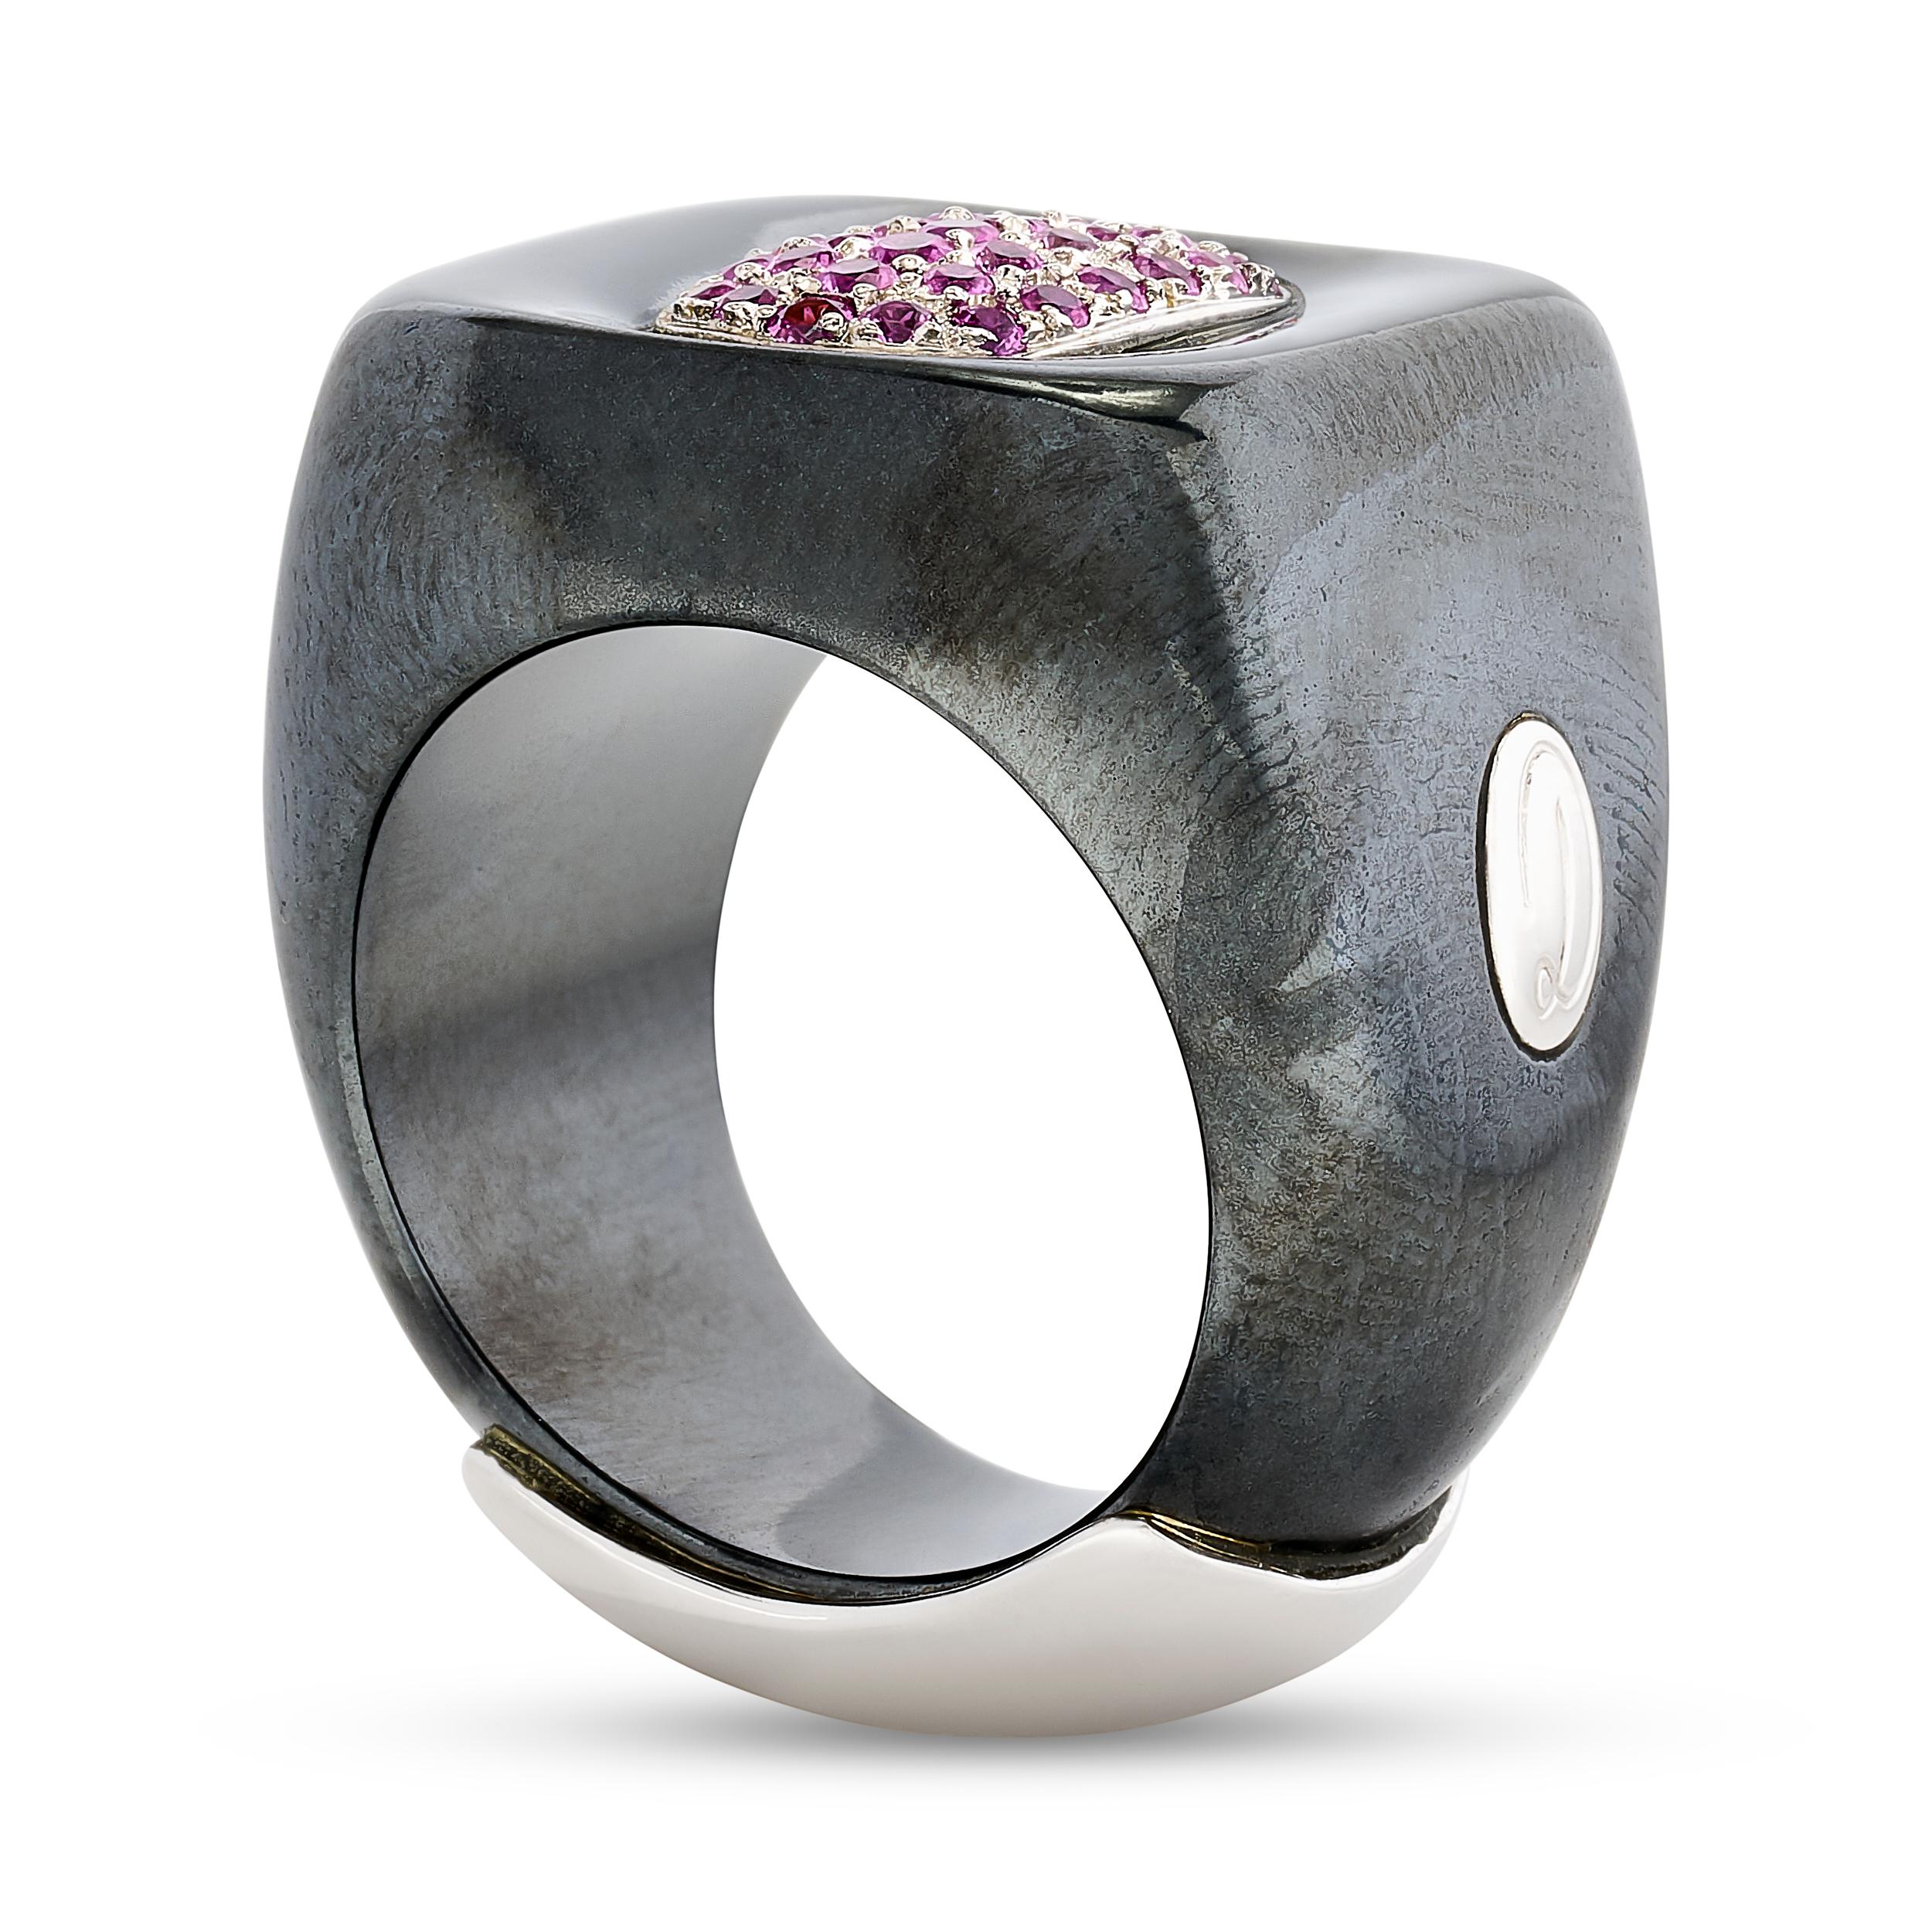 A Damiani ring featuring radiant pink sapphires in a pave center, encased by a wide hematite band.

There are 34 round pink sapphires that weigh approximately 0.65 carats; they are set in 18k white gold.
The ring is a size US 8.
It is stamped: 